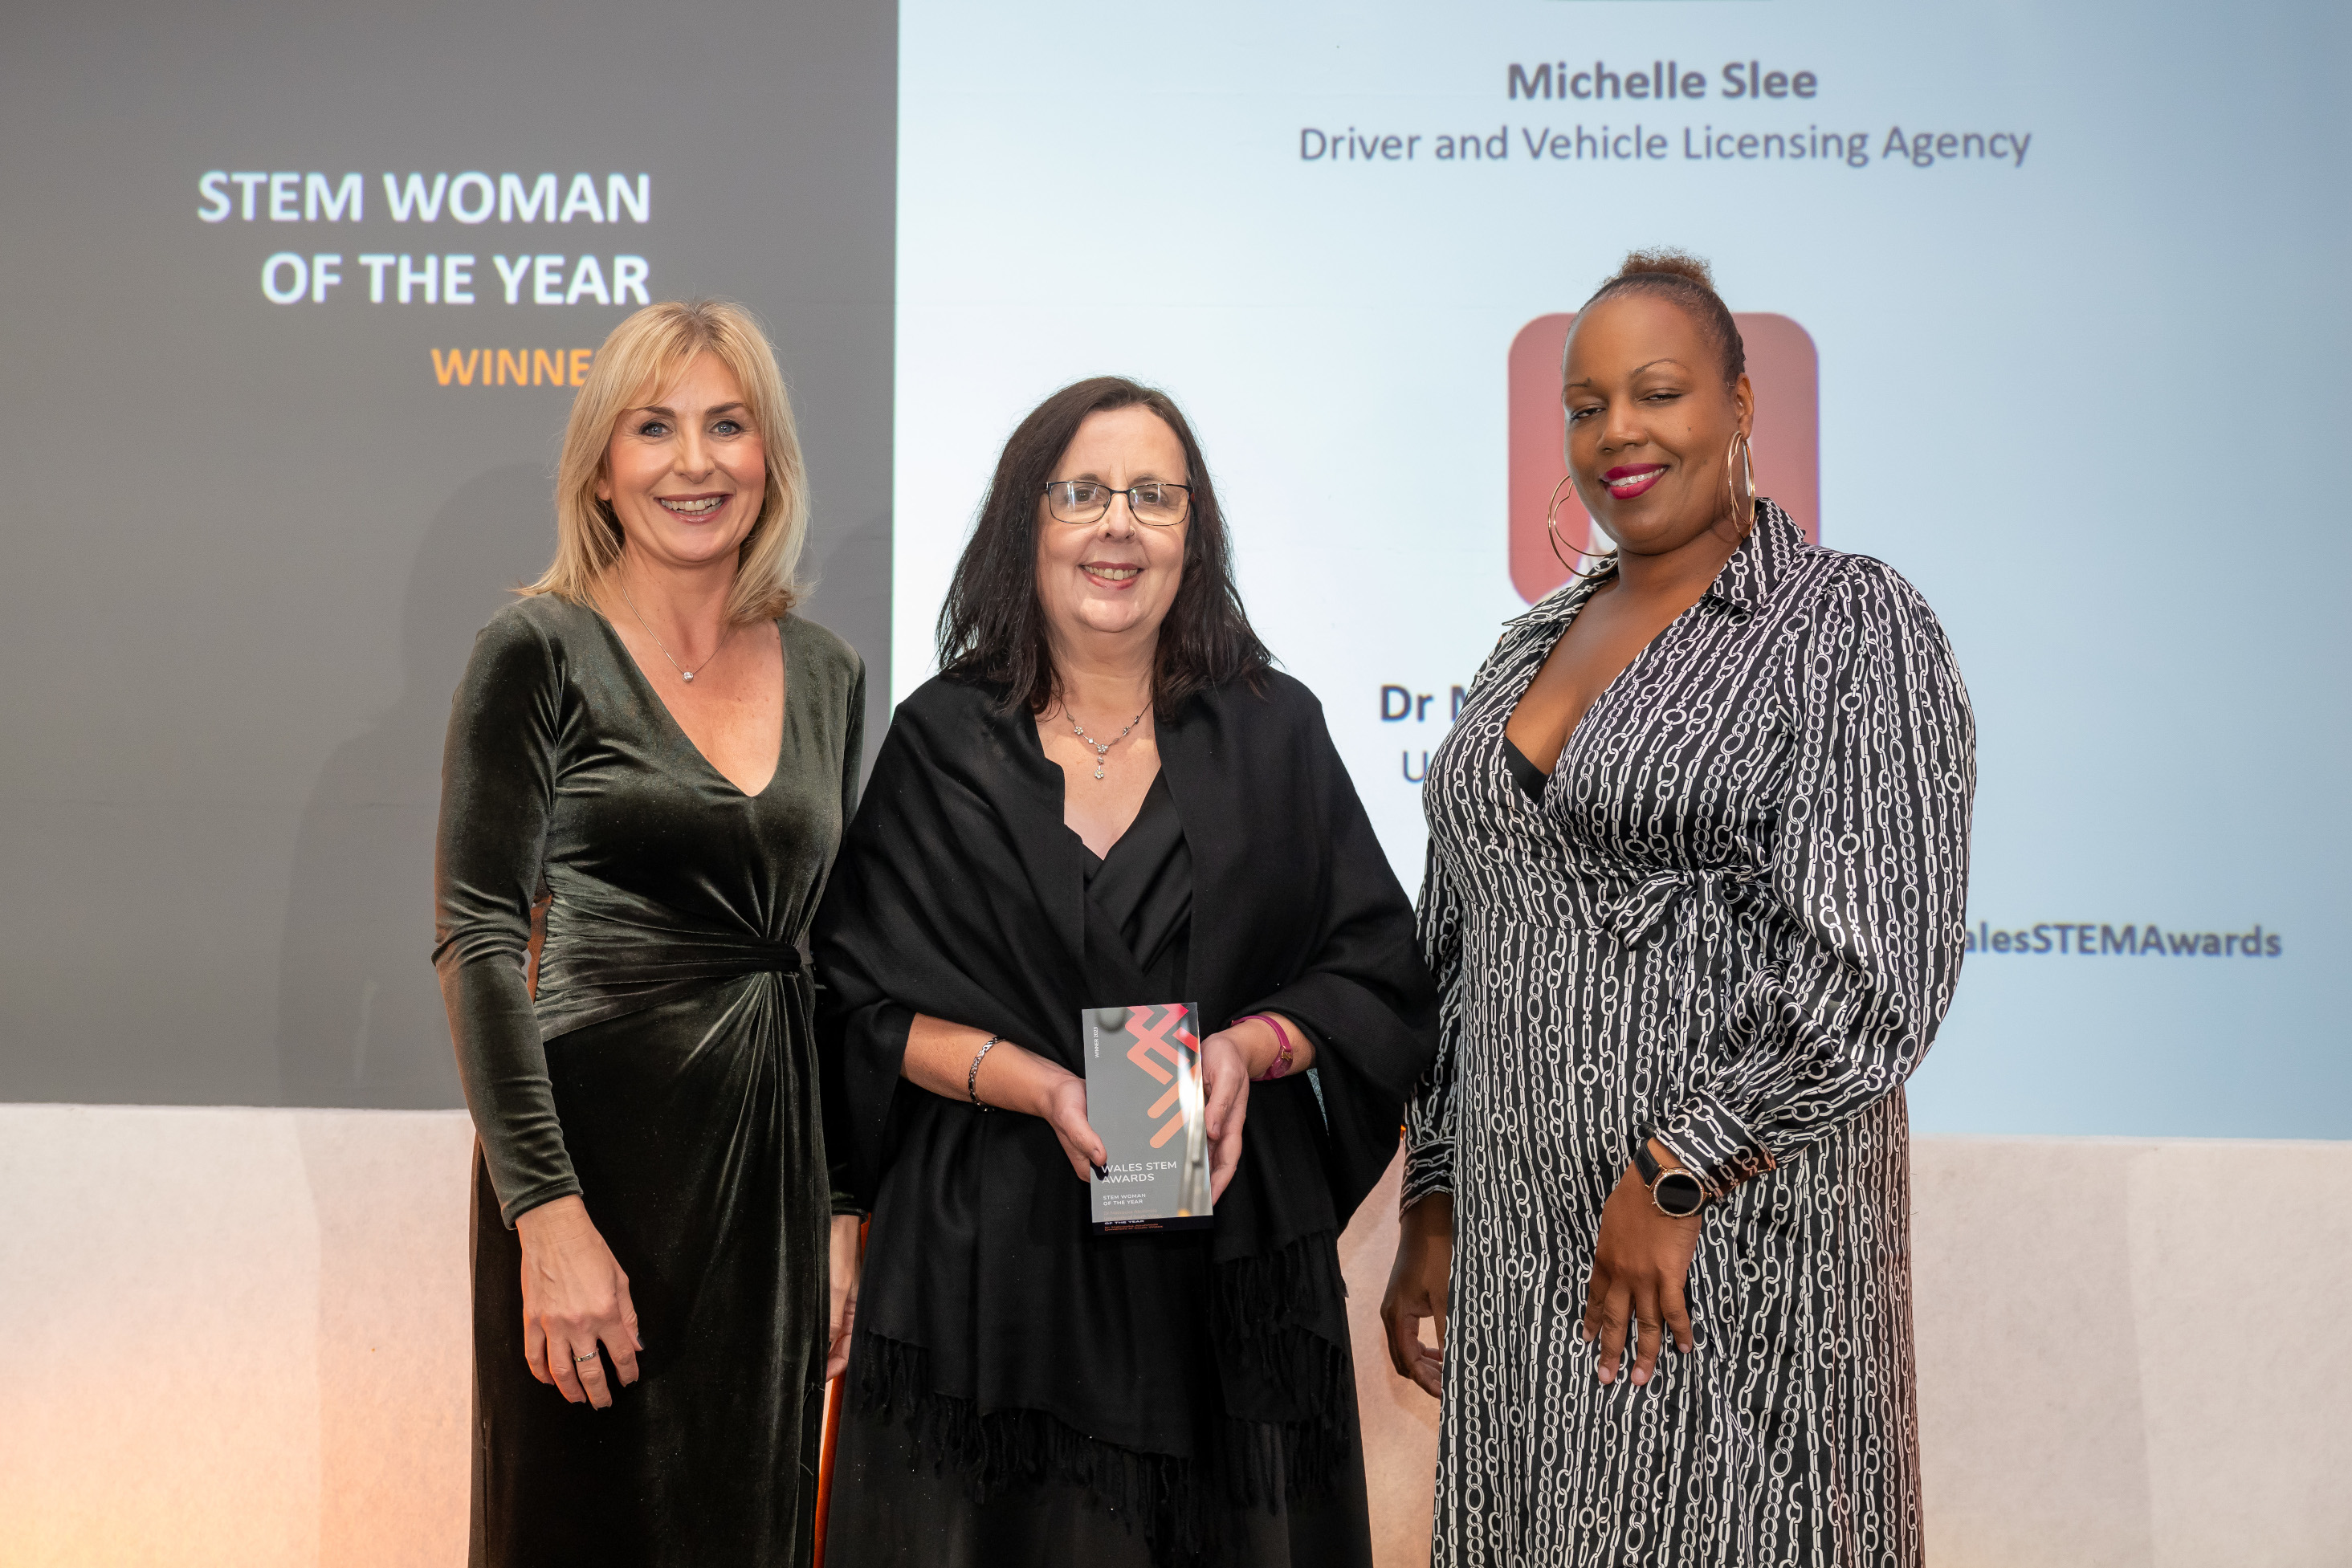 Michelle Slee from DVLA wins STEM Woman of the Year Award